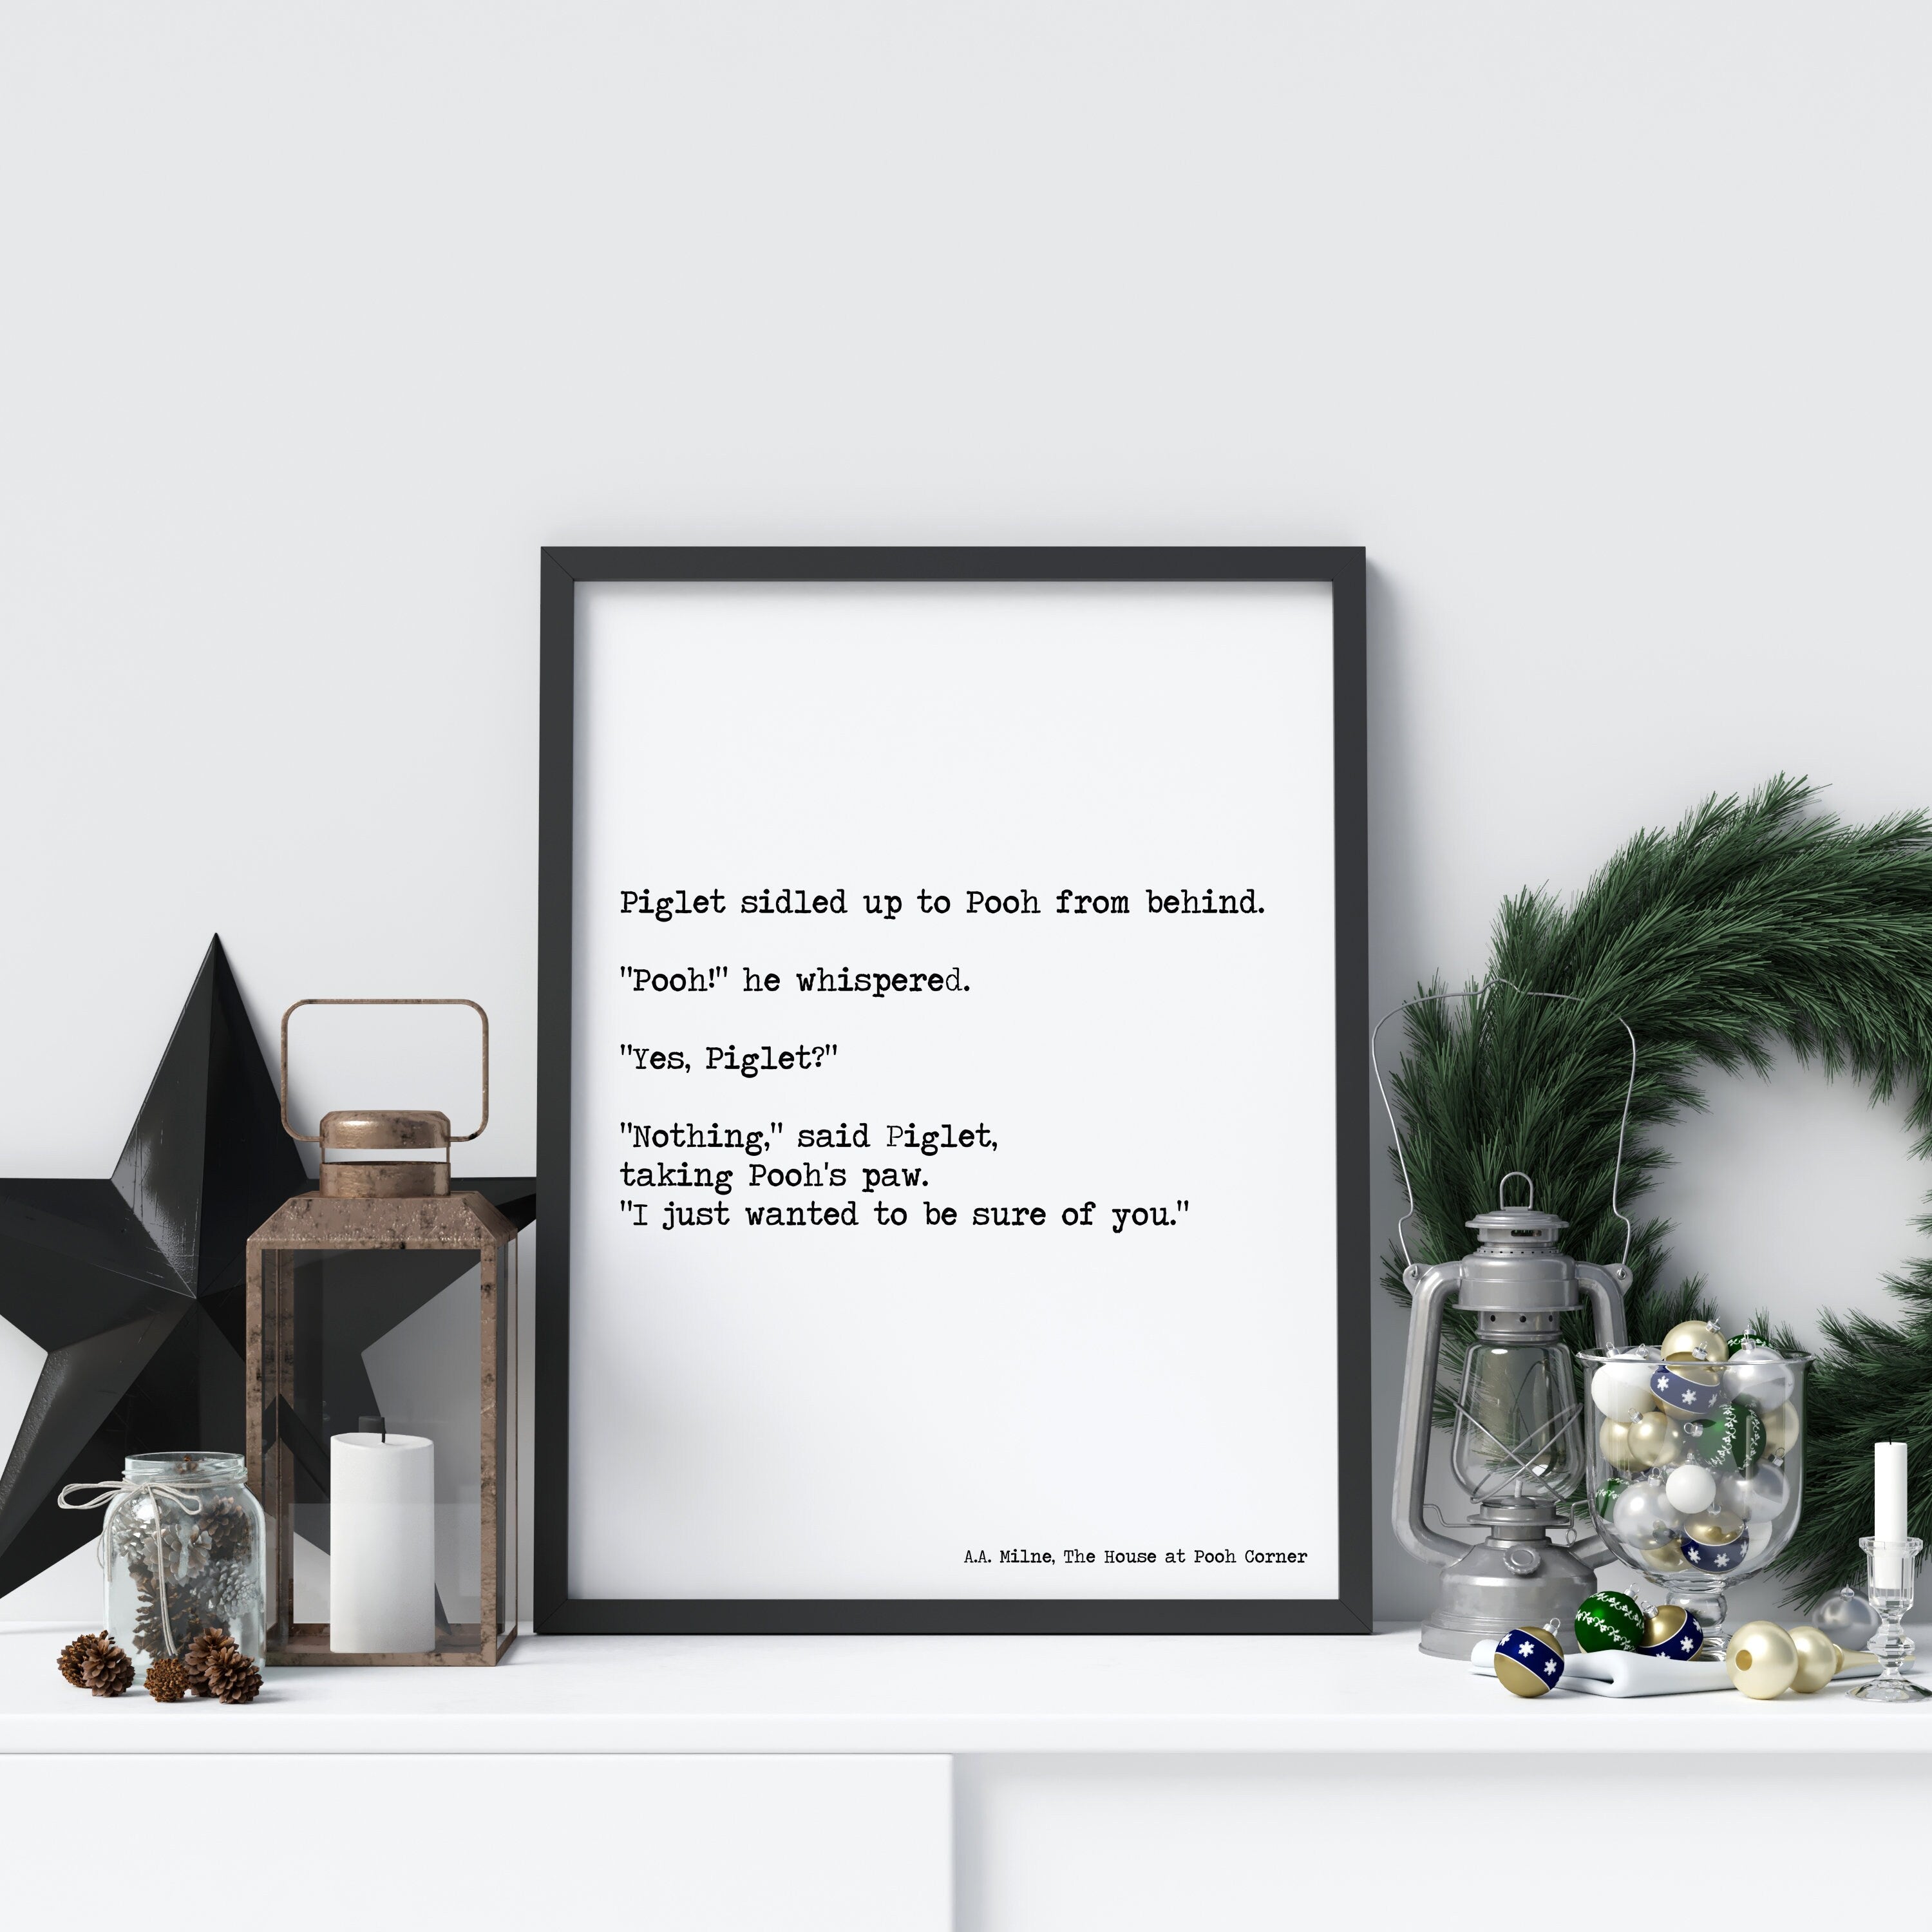 Winnie the Pooh A.A Milne Quote Print, Just Wanted to be Sure of You, Black & White Wall Art Decor